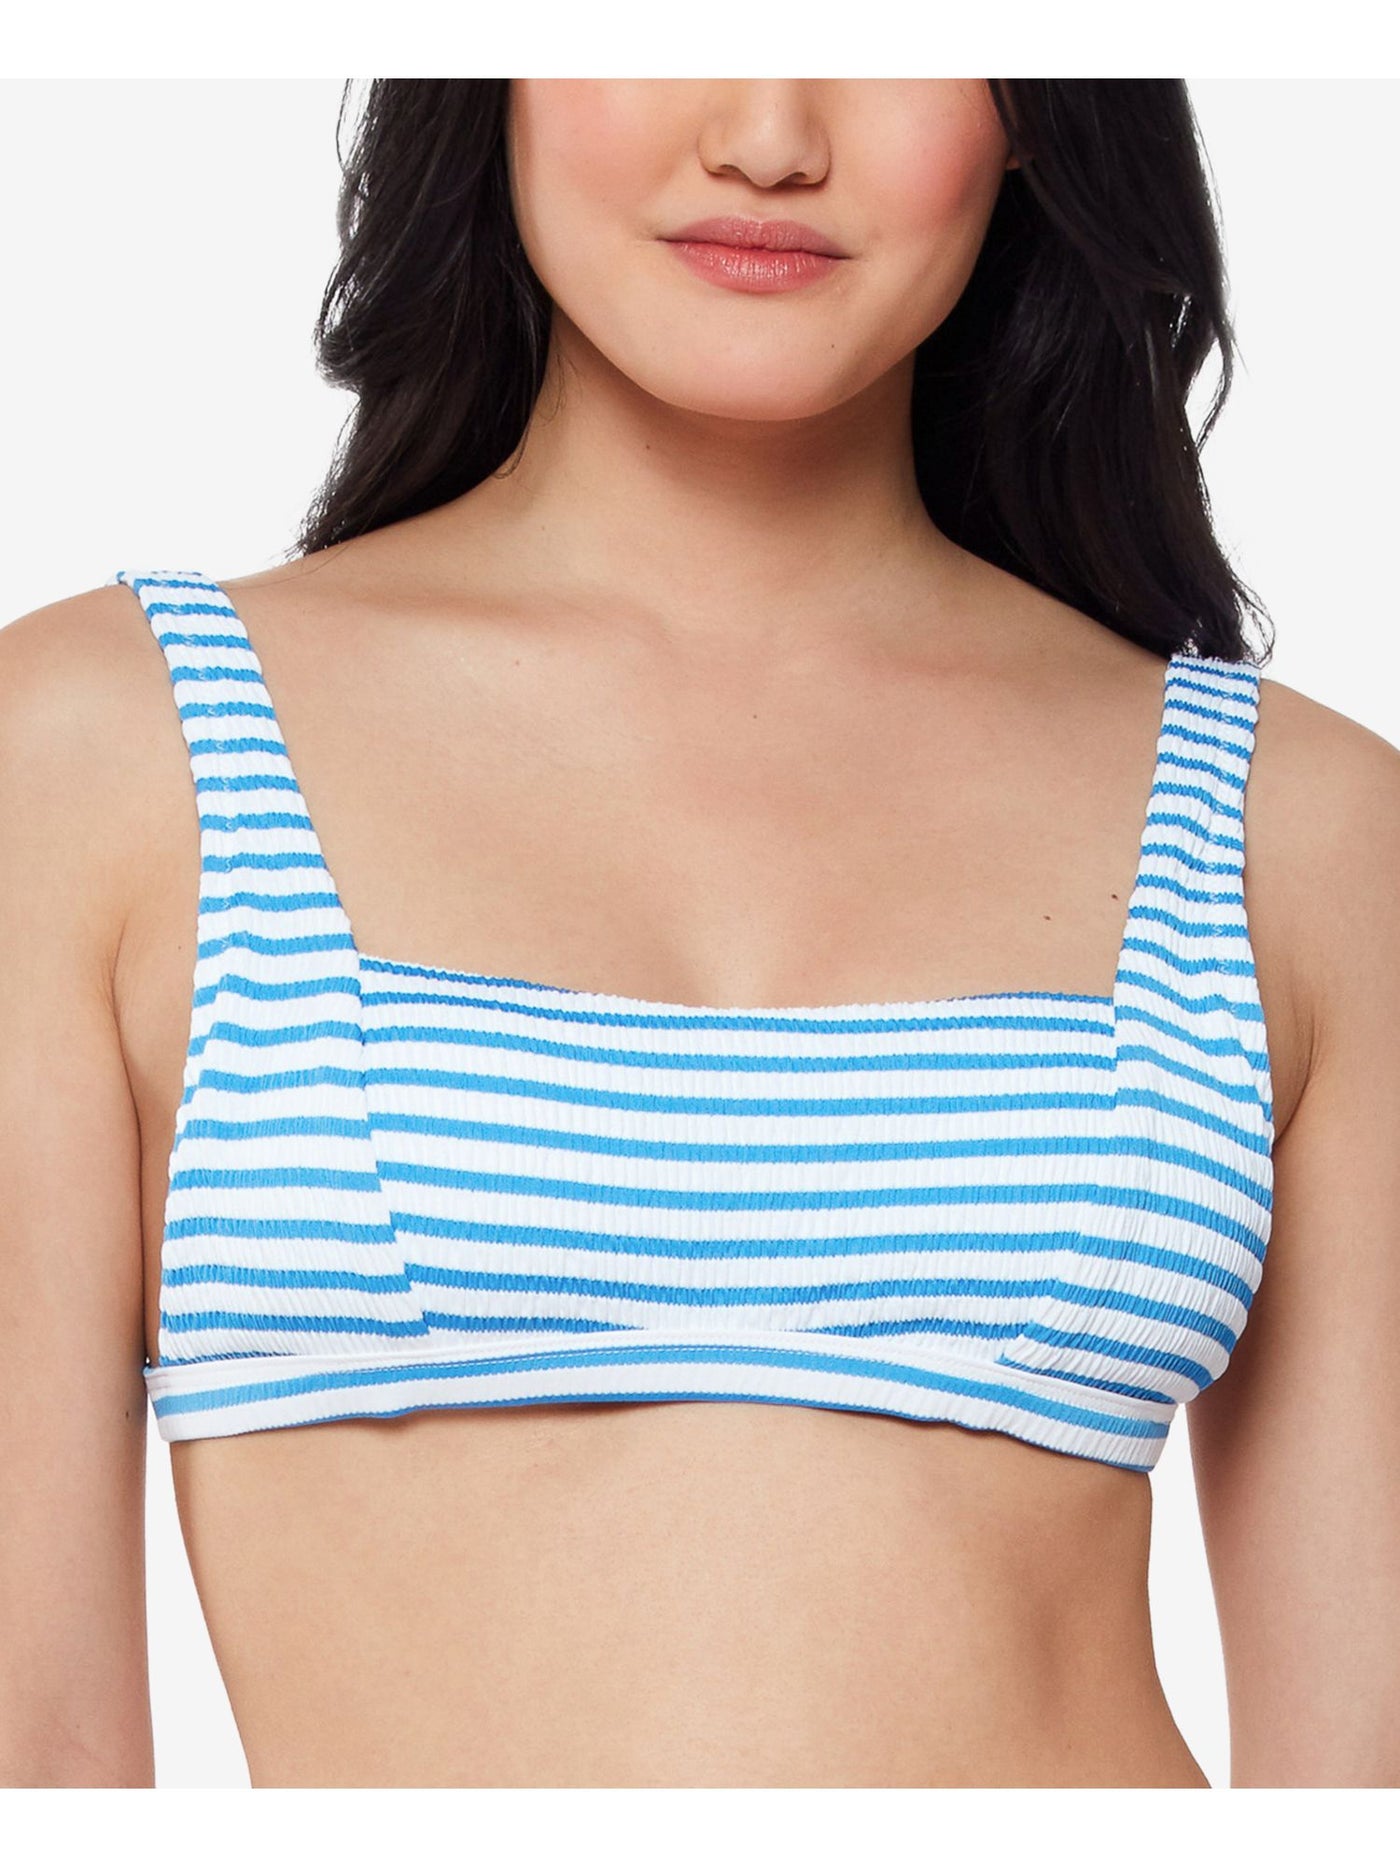 JESSICA SIMPSON Women's Blue Striped Stretch Removable Cups Tie Textured Adjustable Square Neck Swimsuit Top XL